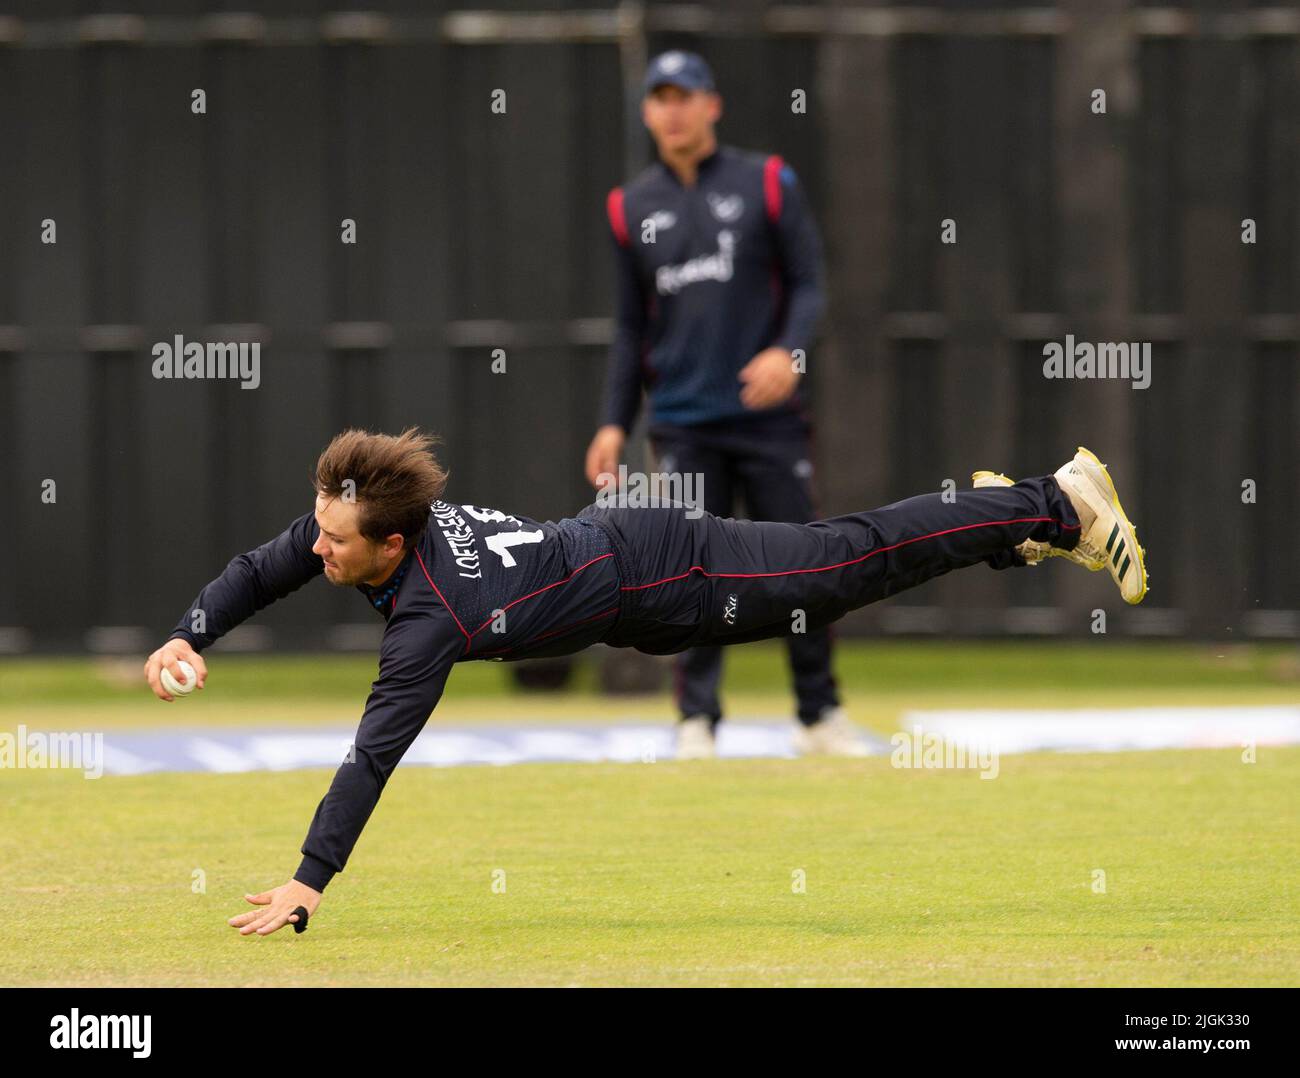 ICC Men's Cricket World Cup League 2 - Nepal v, Namibia. 10th July, 2022. Nepal take on Namibia in the ICC Men's Cricket World Cup League 2 at Cambusdoon, Ayr. Pic shows: Great fielding by Namibia's Jan Nicol Loftie-Eaton, Credit: Ian Jacobs/Alamy Live News Stock Photo